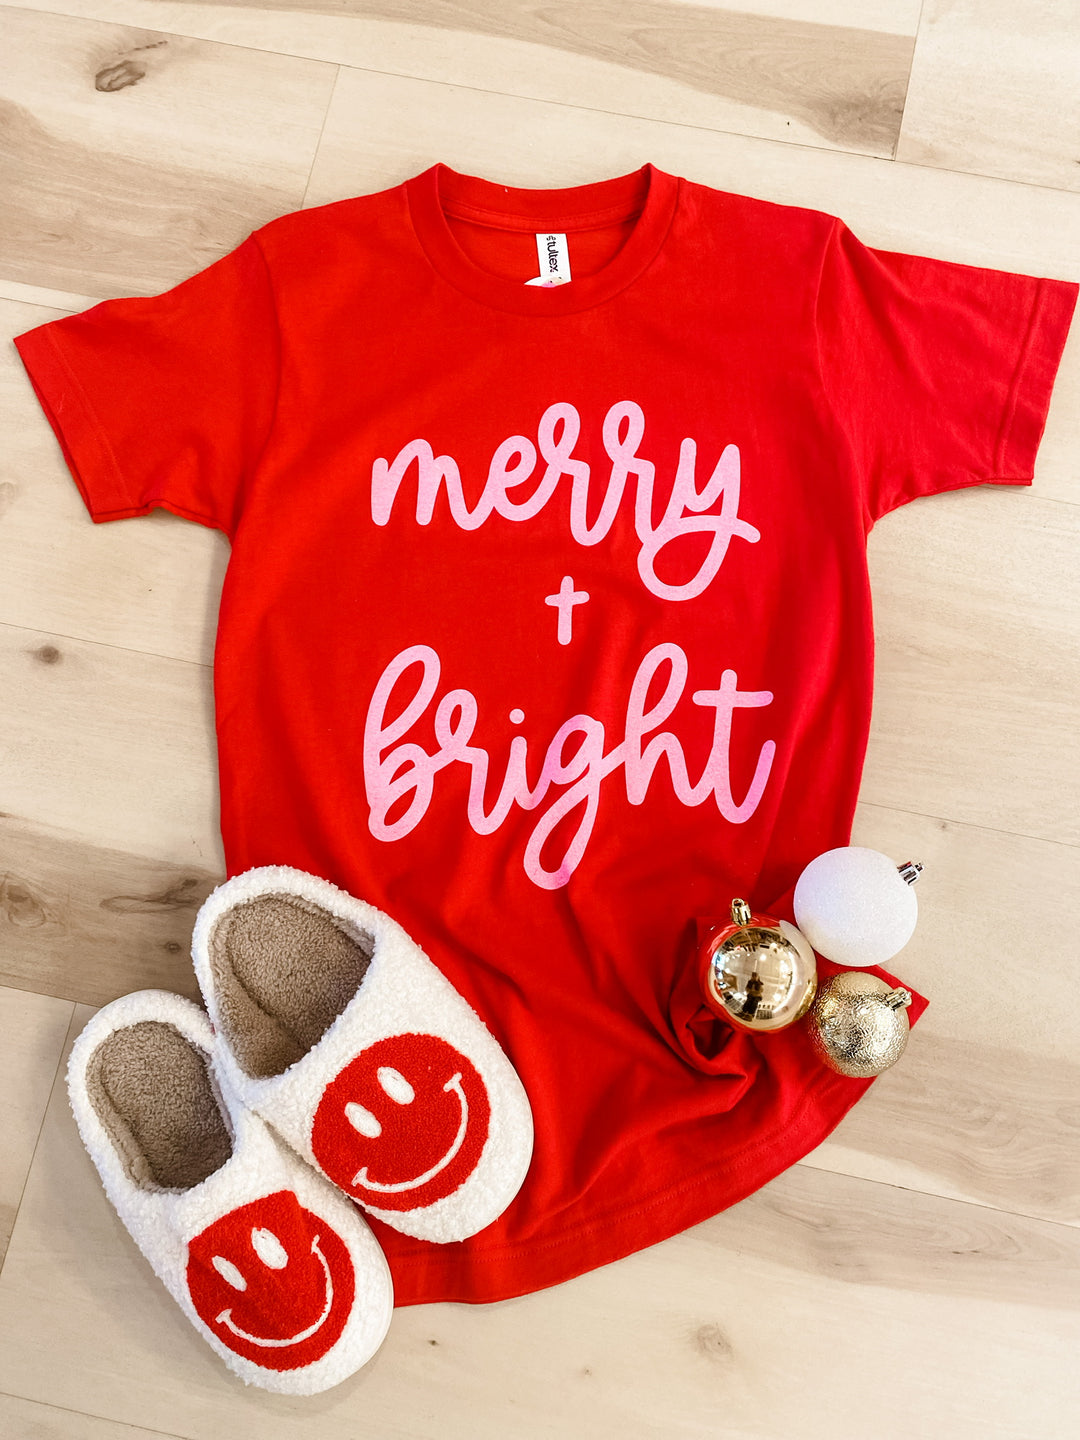 Merry & Bright Tee - The Teal Antler Boutique